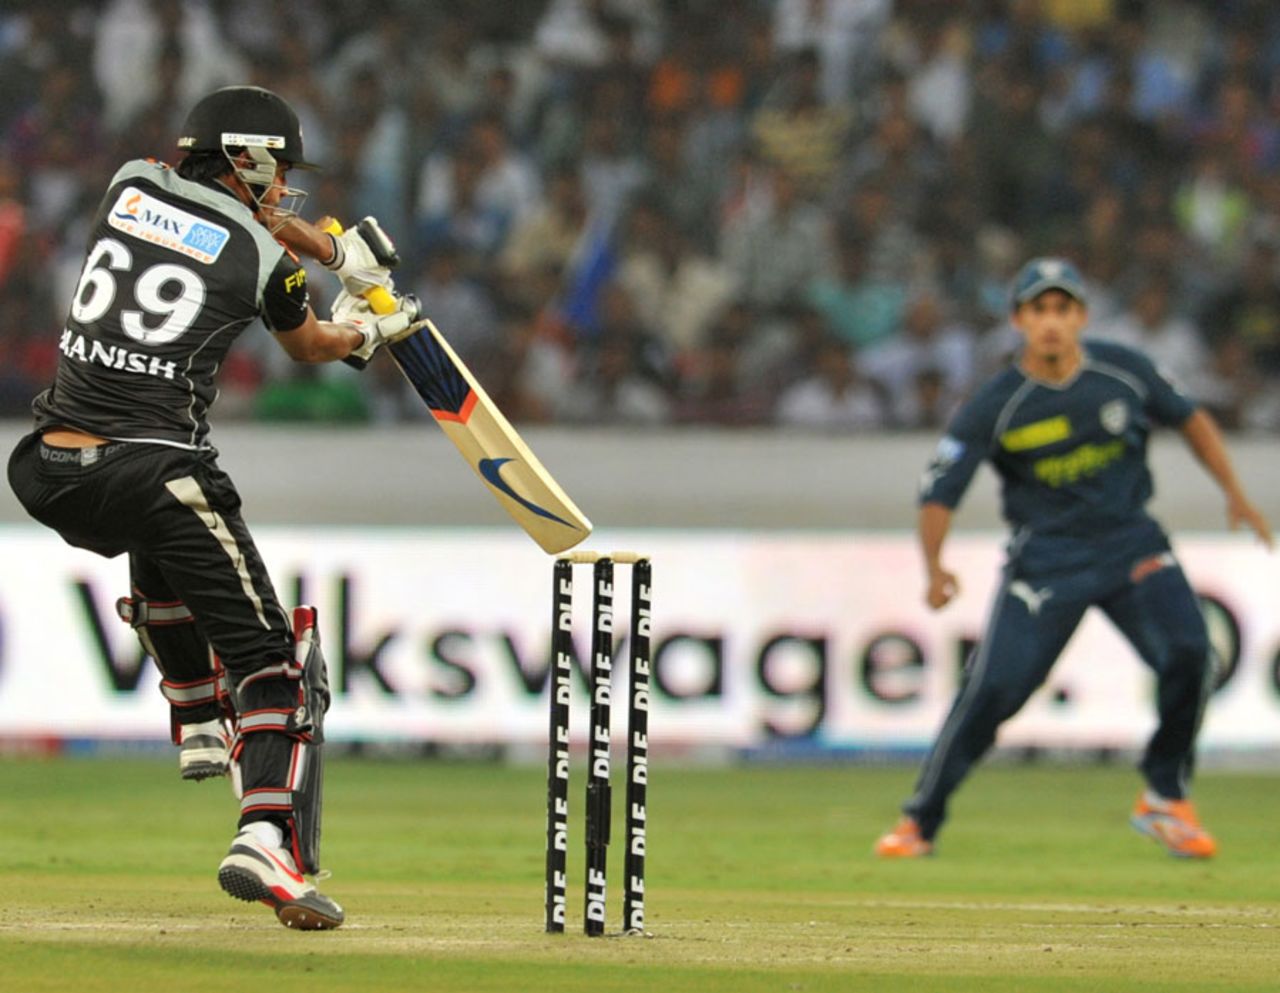 Manish Pandey steers through the off side, Deccan Chargers v Pune Warriors, IPL 2011, Hyderabad, April 10, 2011